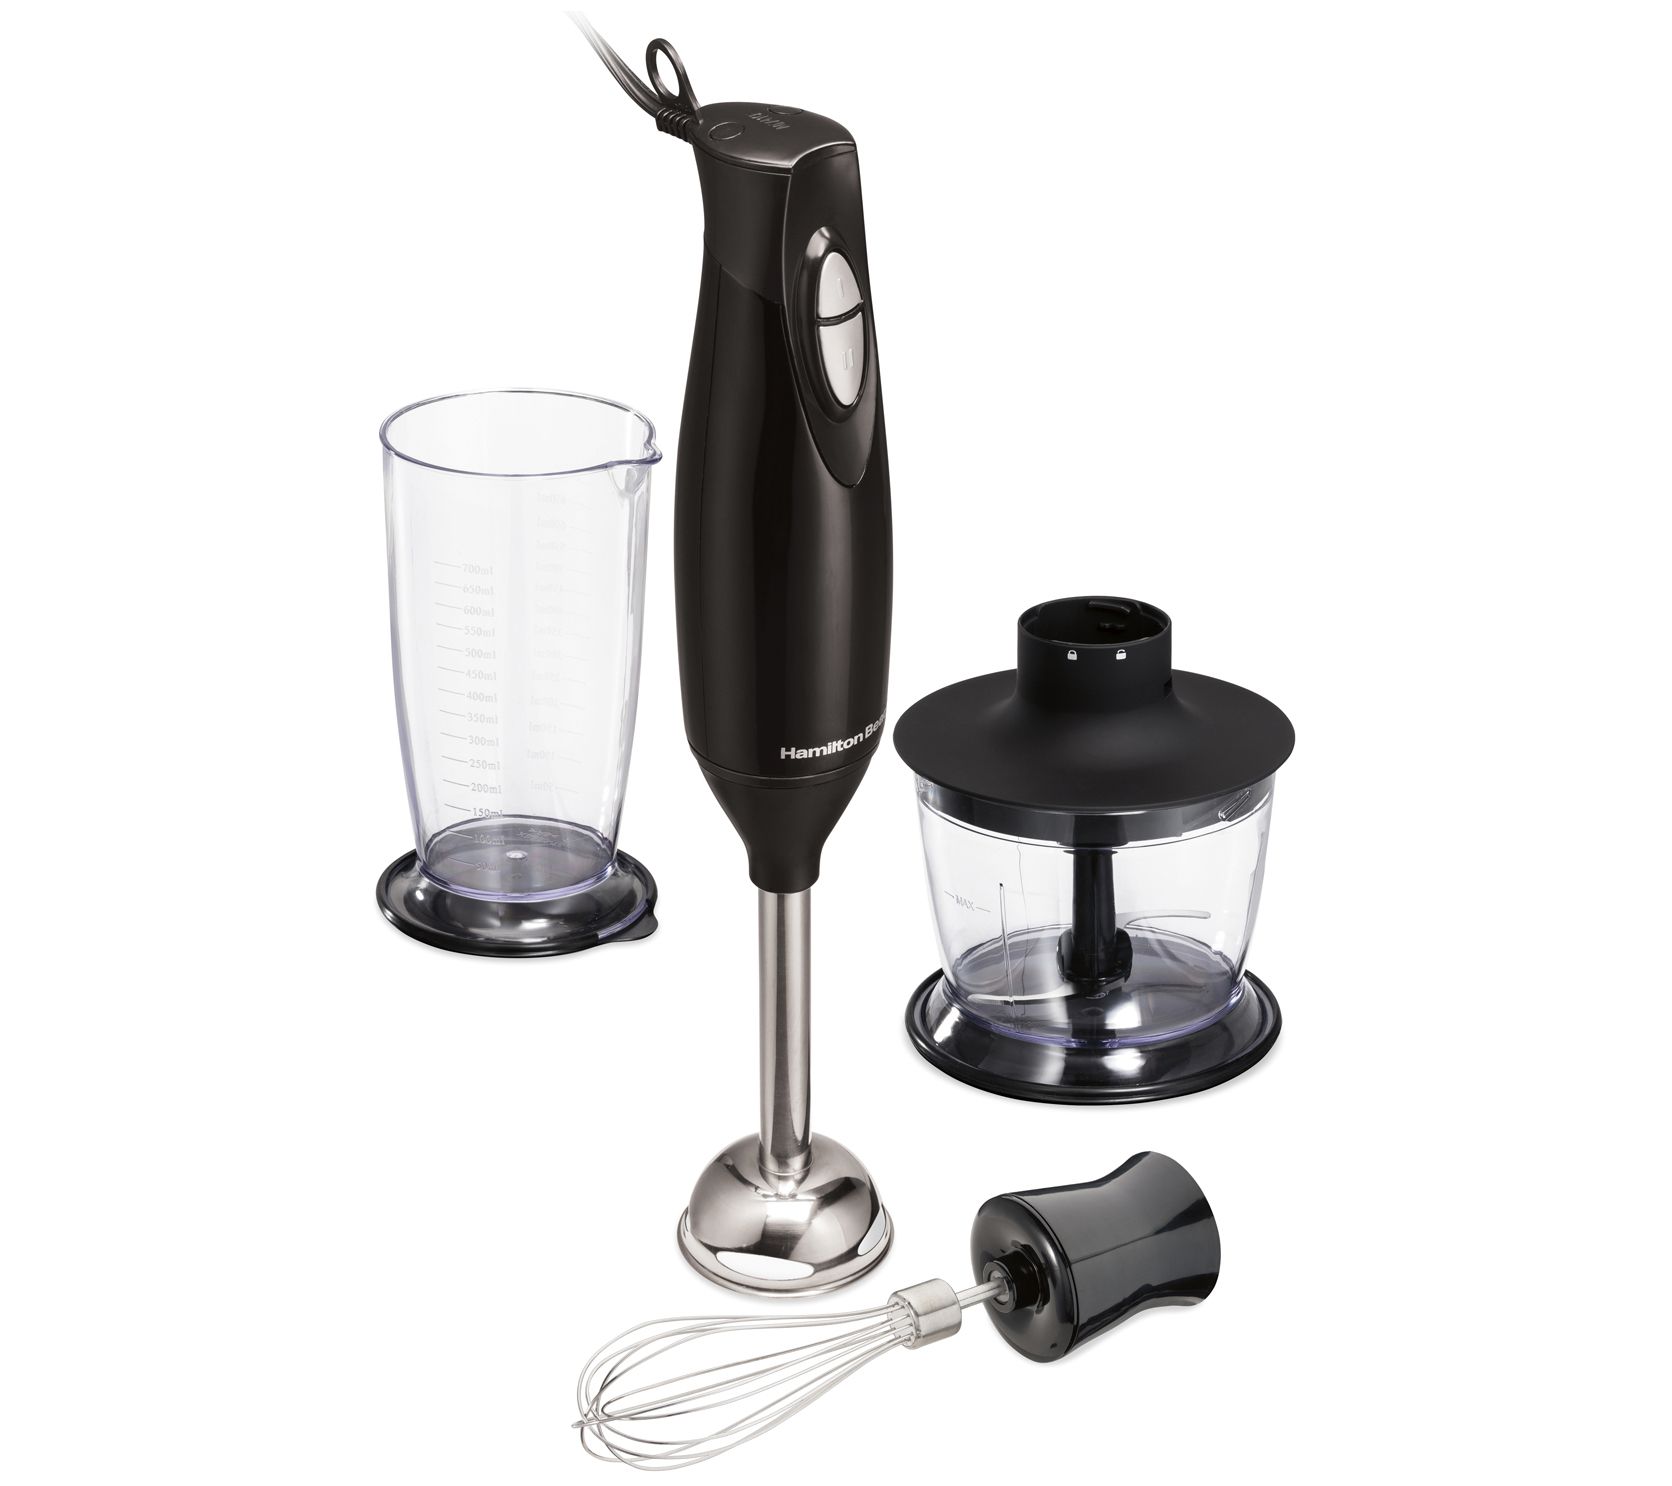 Hamilton Beach 3-in-1 Hand Blender with Wisk 7 Pieces Set